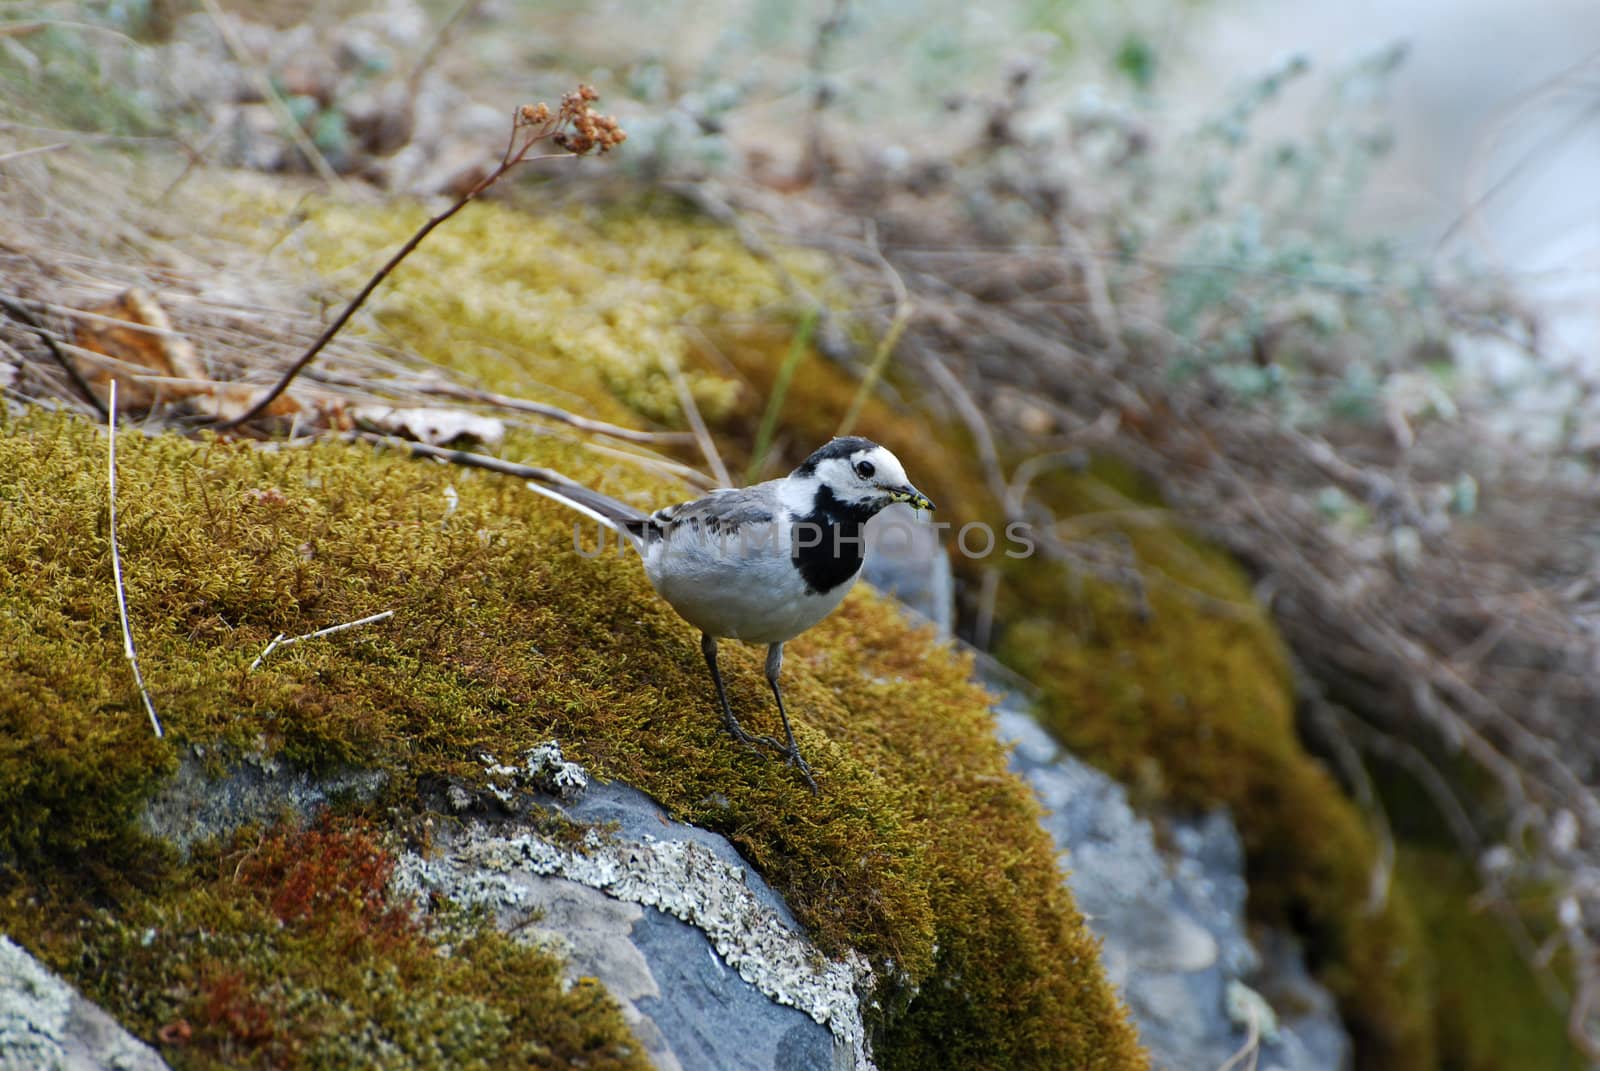 
white wagtail on the rock with insects in the beak
